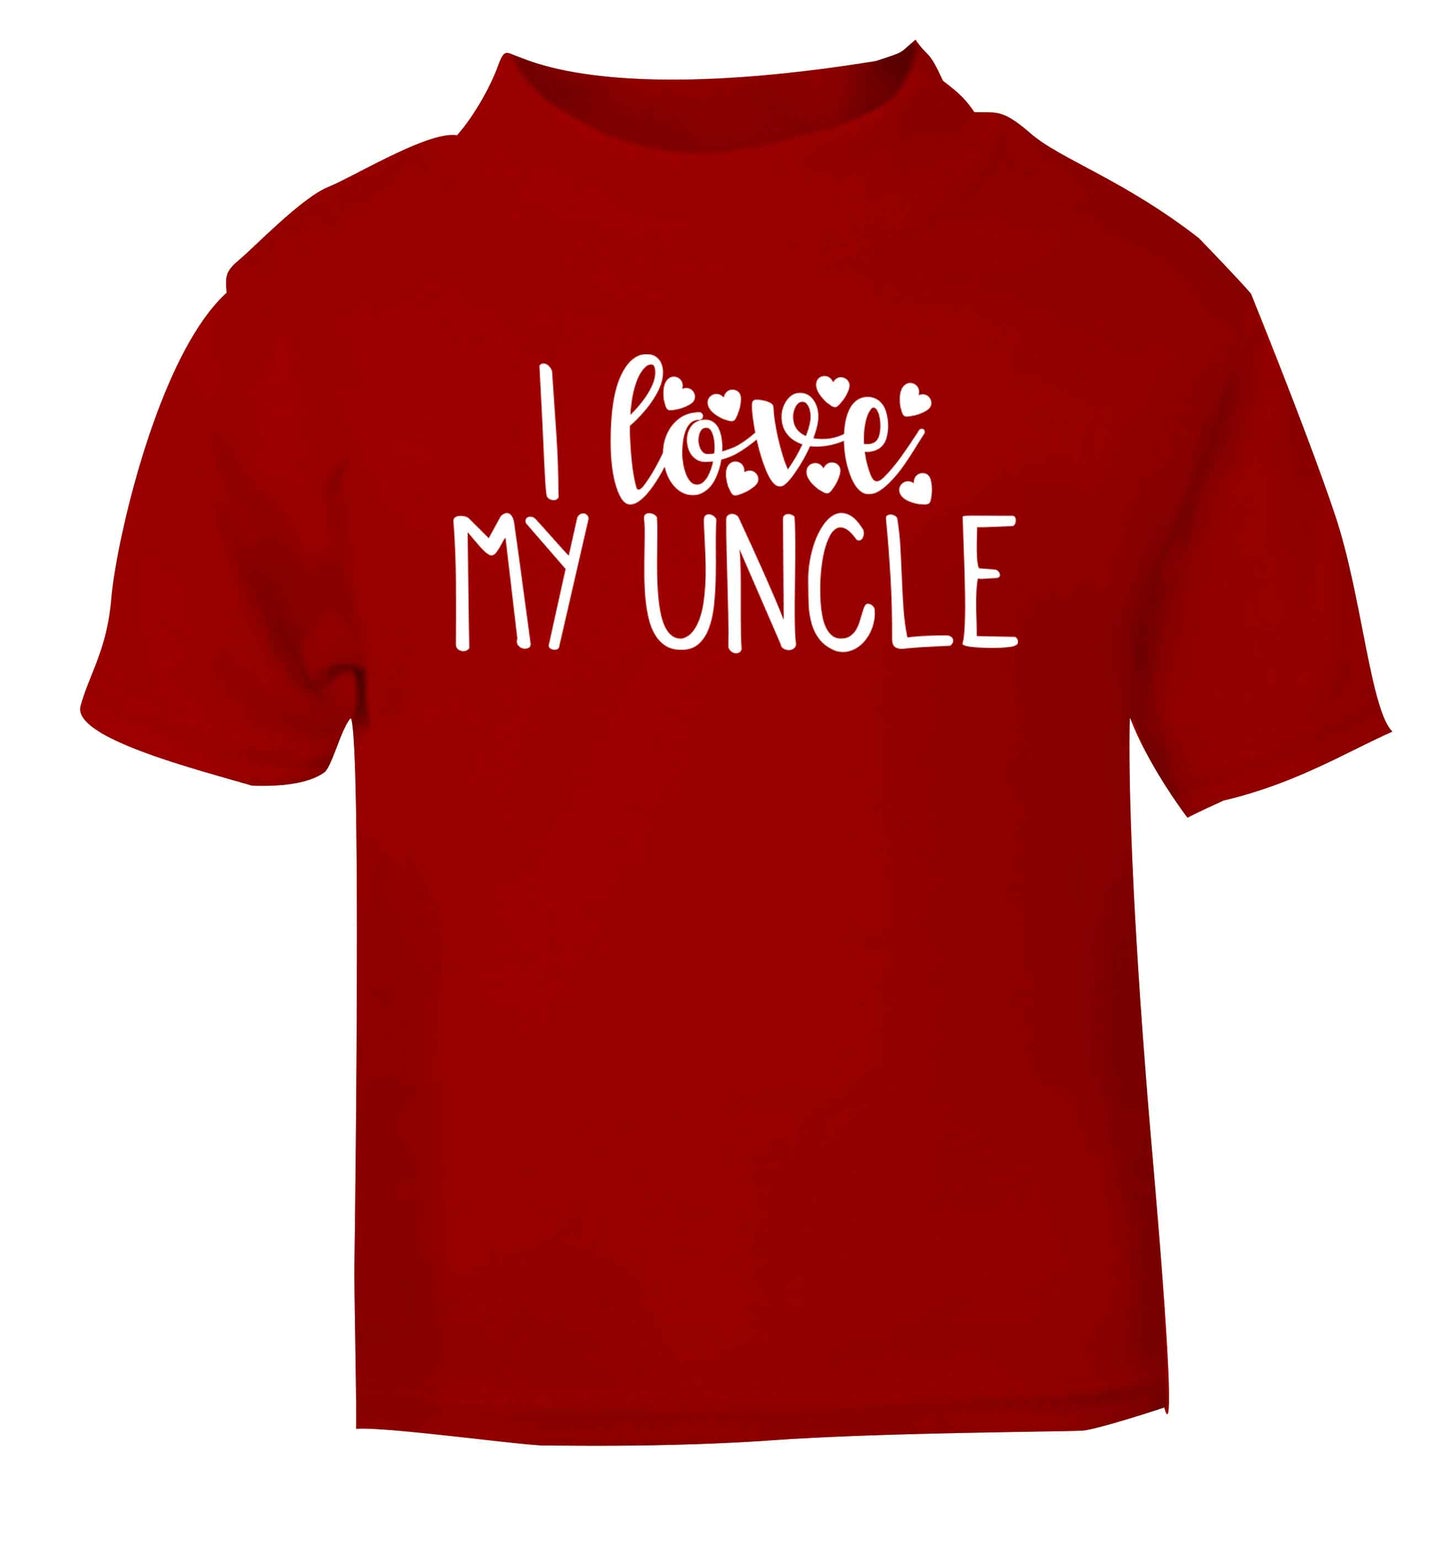 I love my uncle red Baby Toddler Tshirt 2 Years